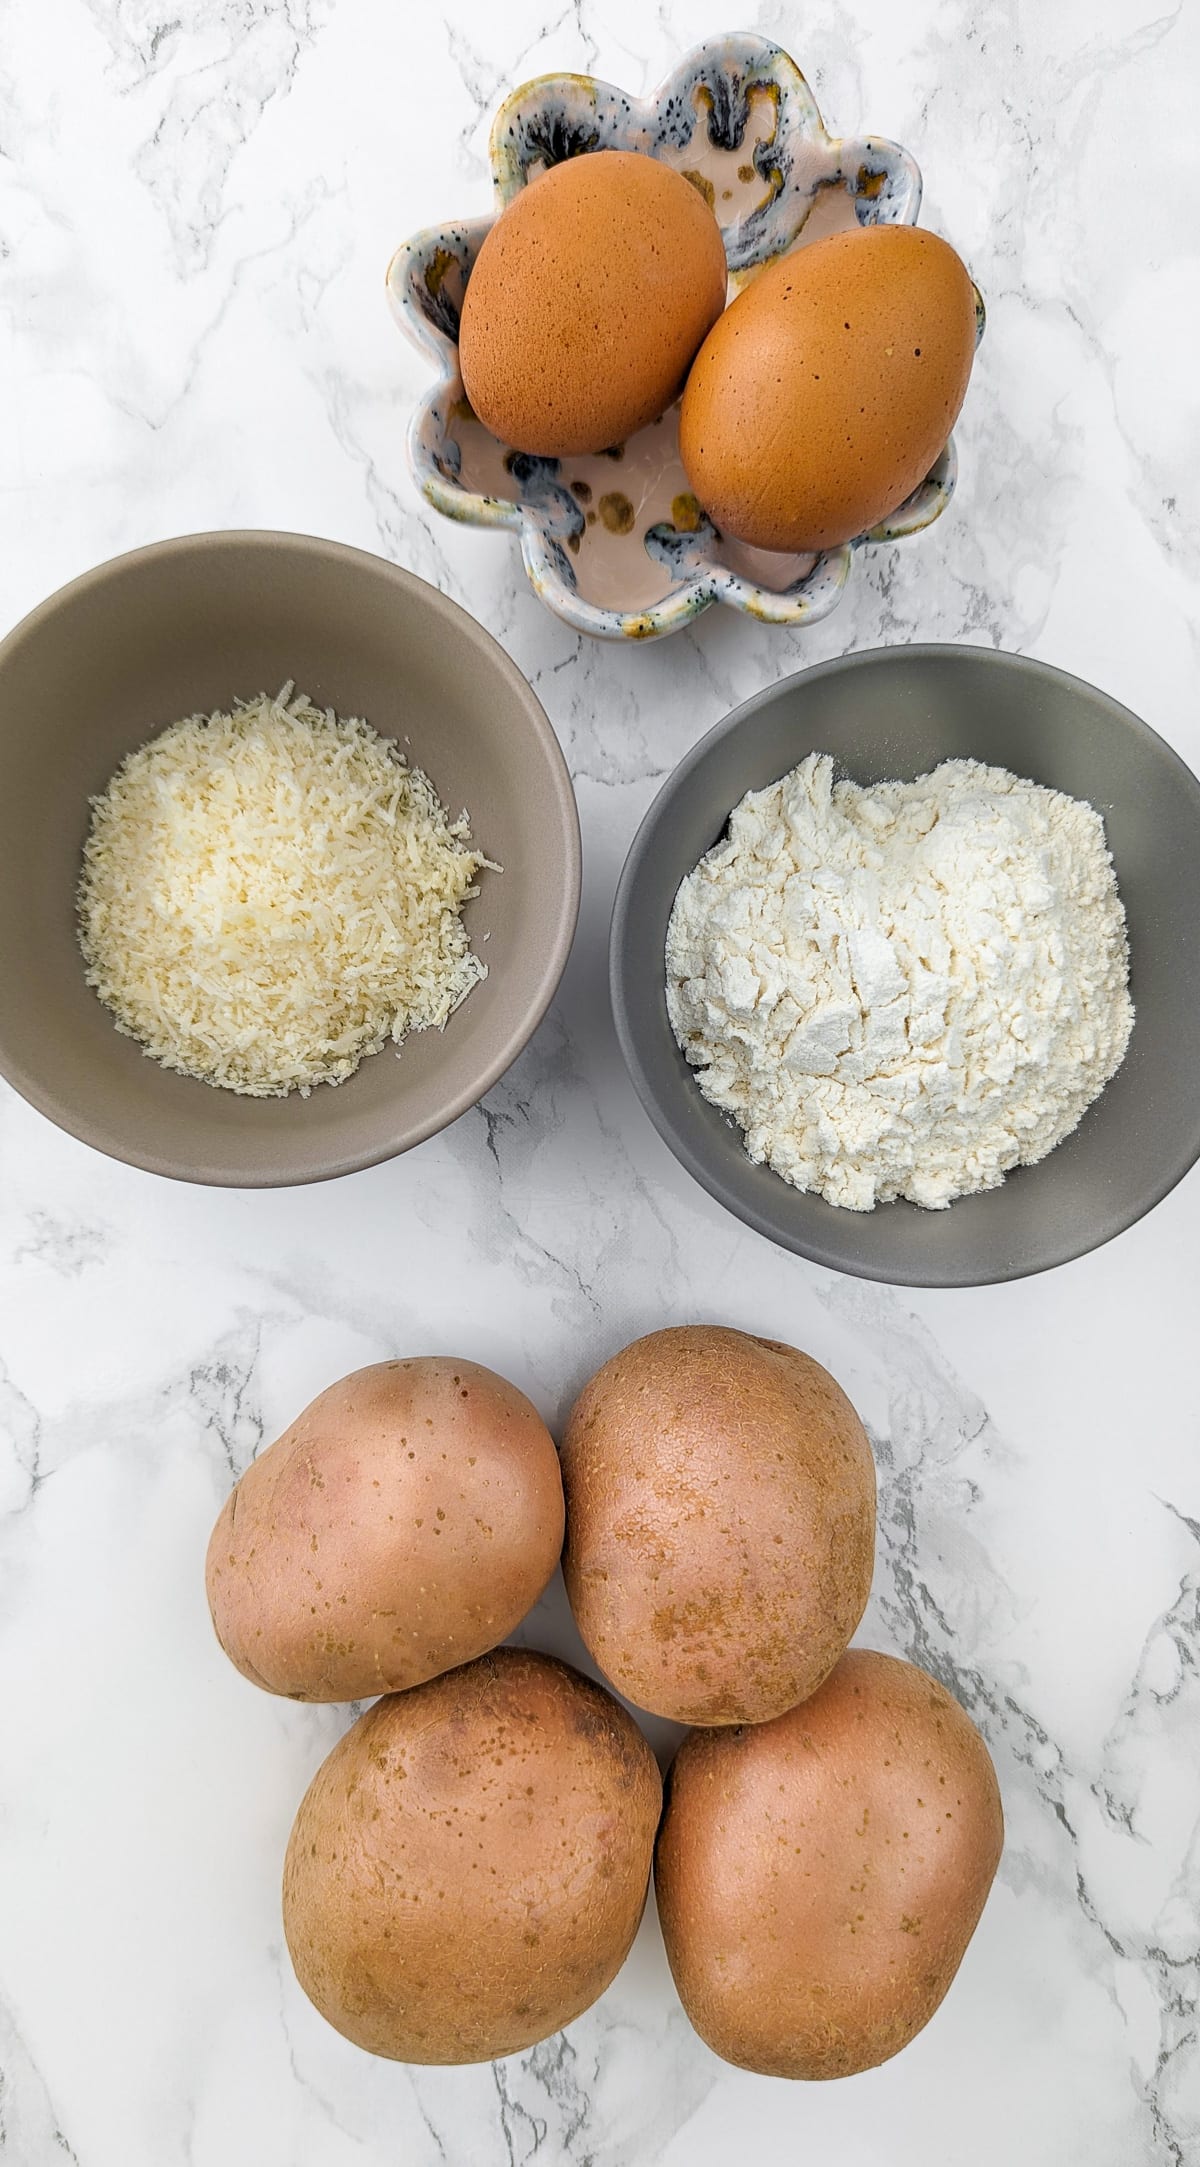 Top view of 4 potatoes, flour, parmesan and 2 eggs on a white marble table.